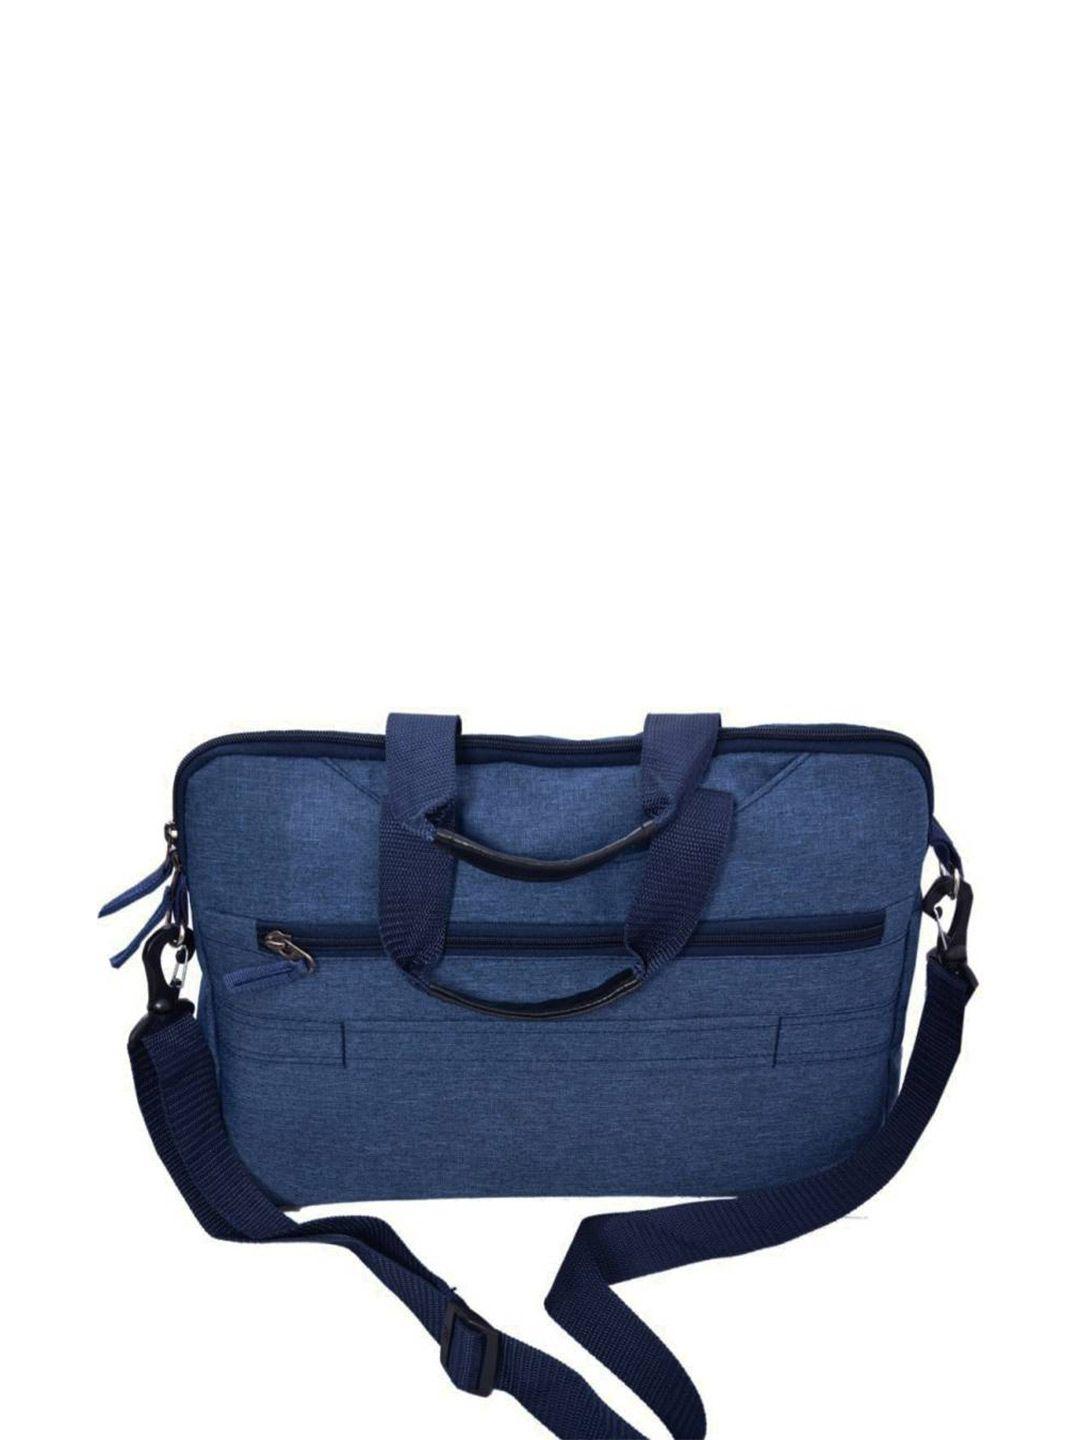 lookmuster laptop bag with detachable strap